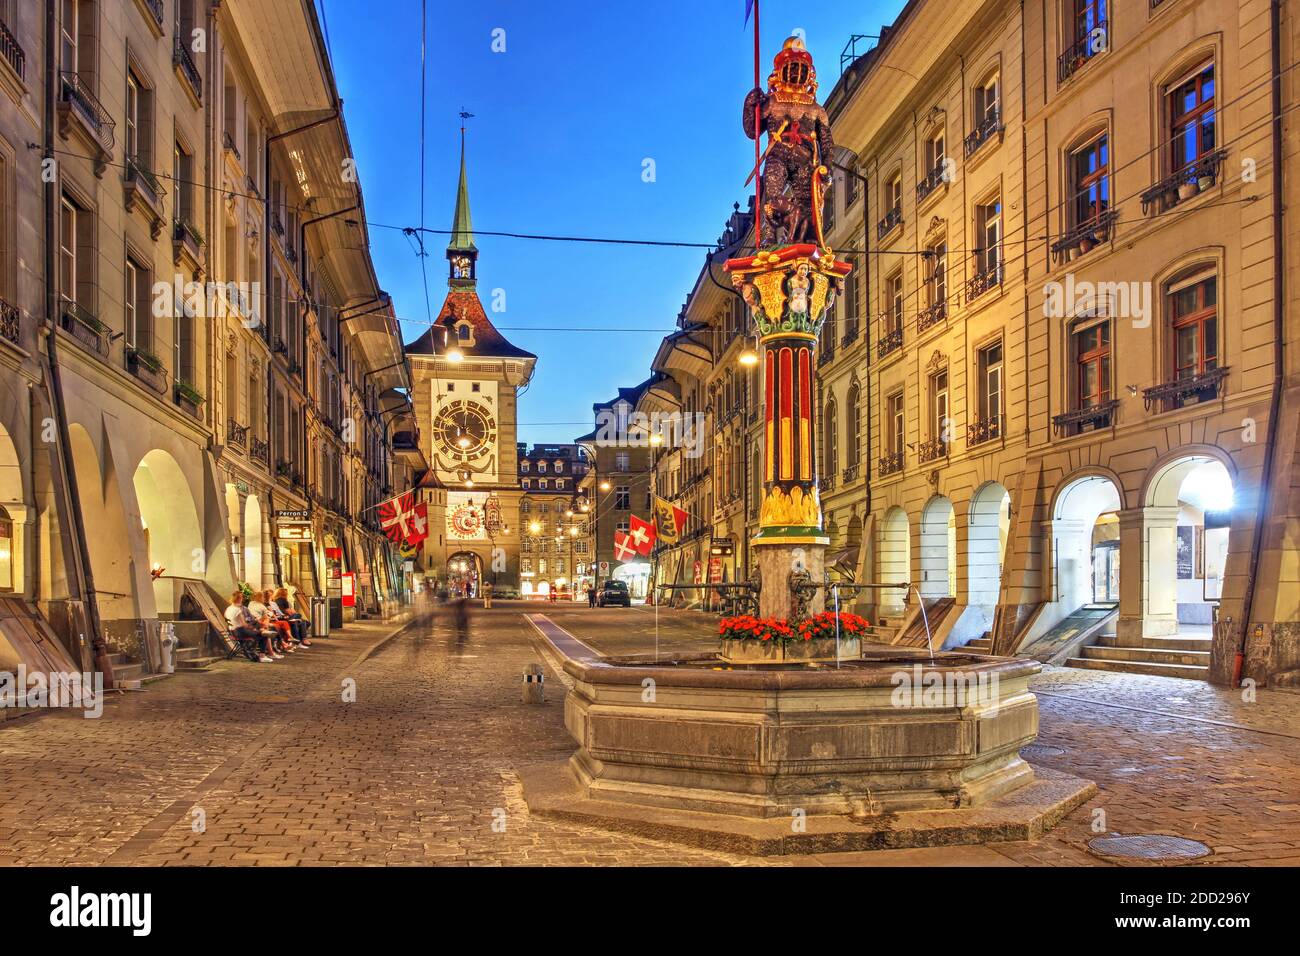 Night scene along Kramgasse in the old town of Bern (Berne, Berna), Switzerland featuring the Zytglogge Clock Tower. Stock Photo